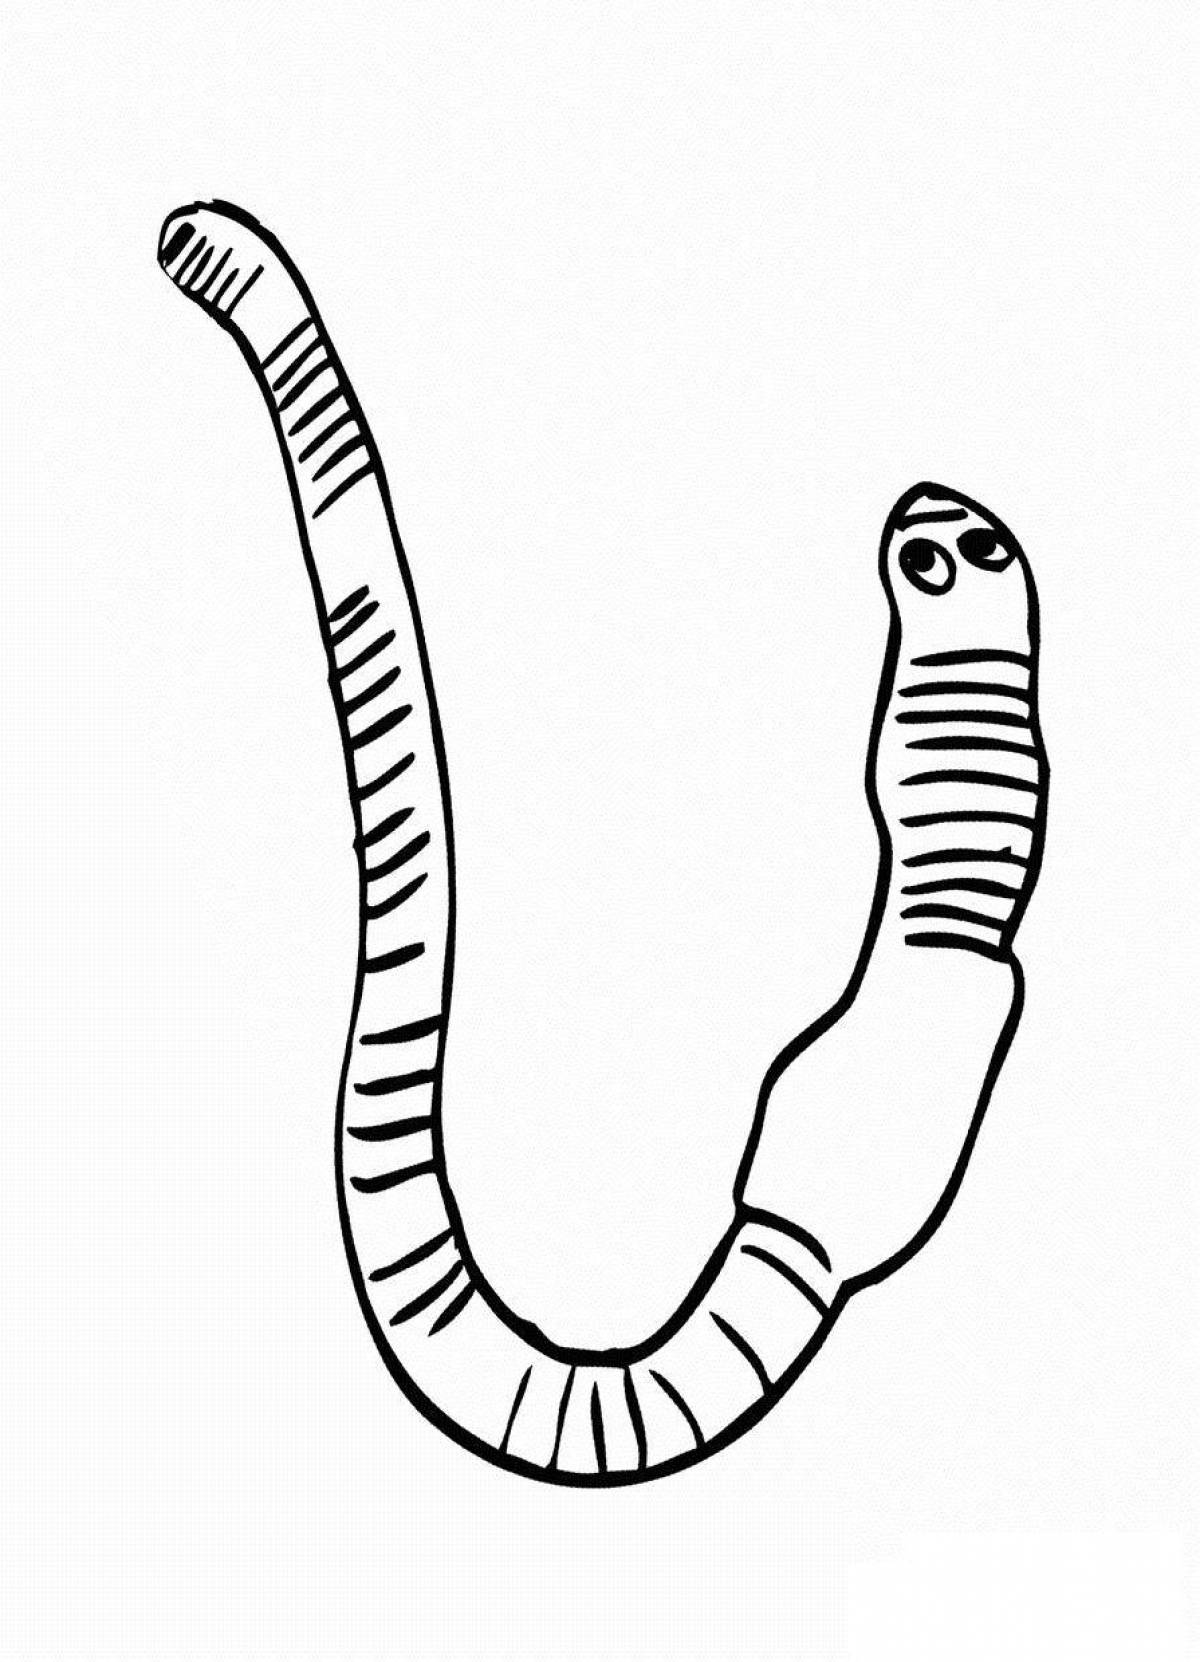 Lovely bridge worm coloring page